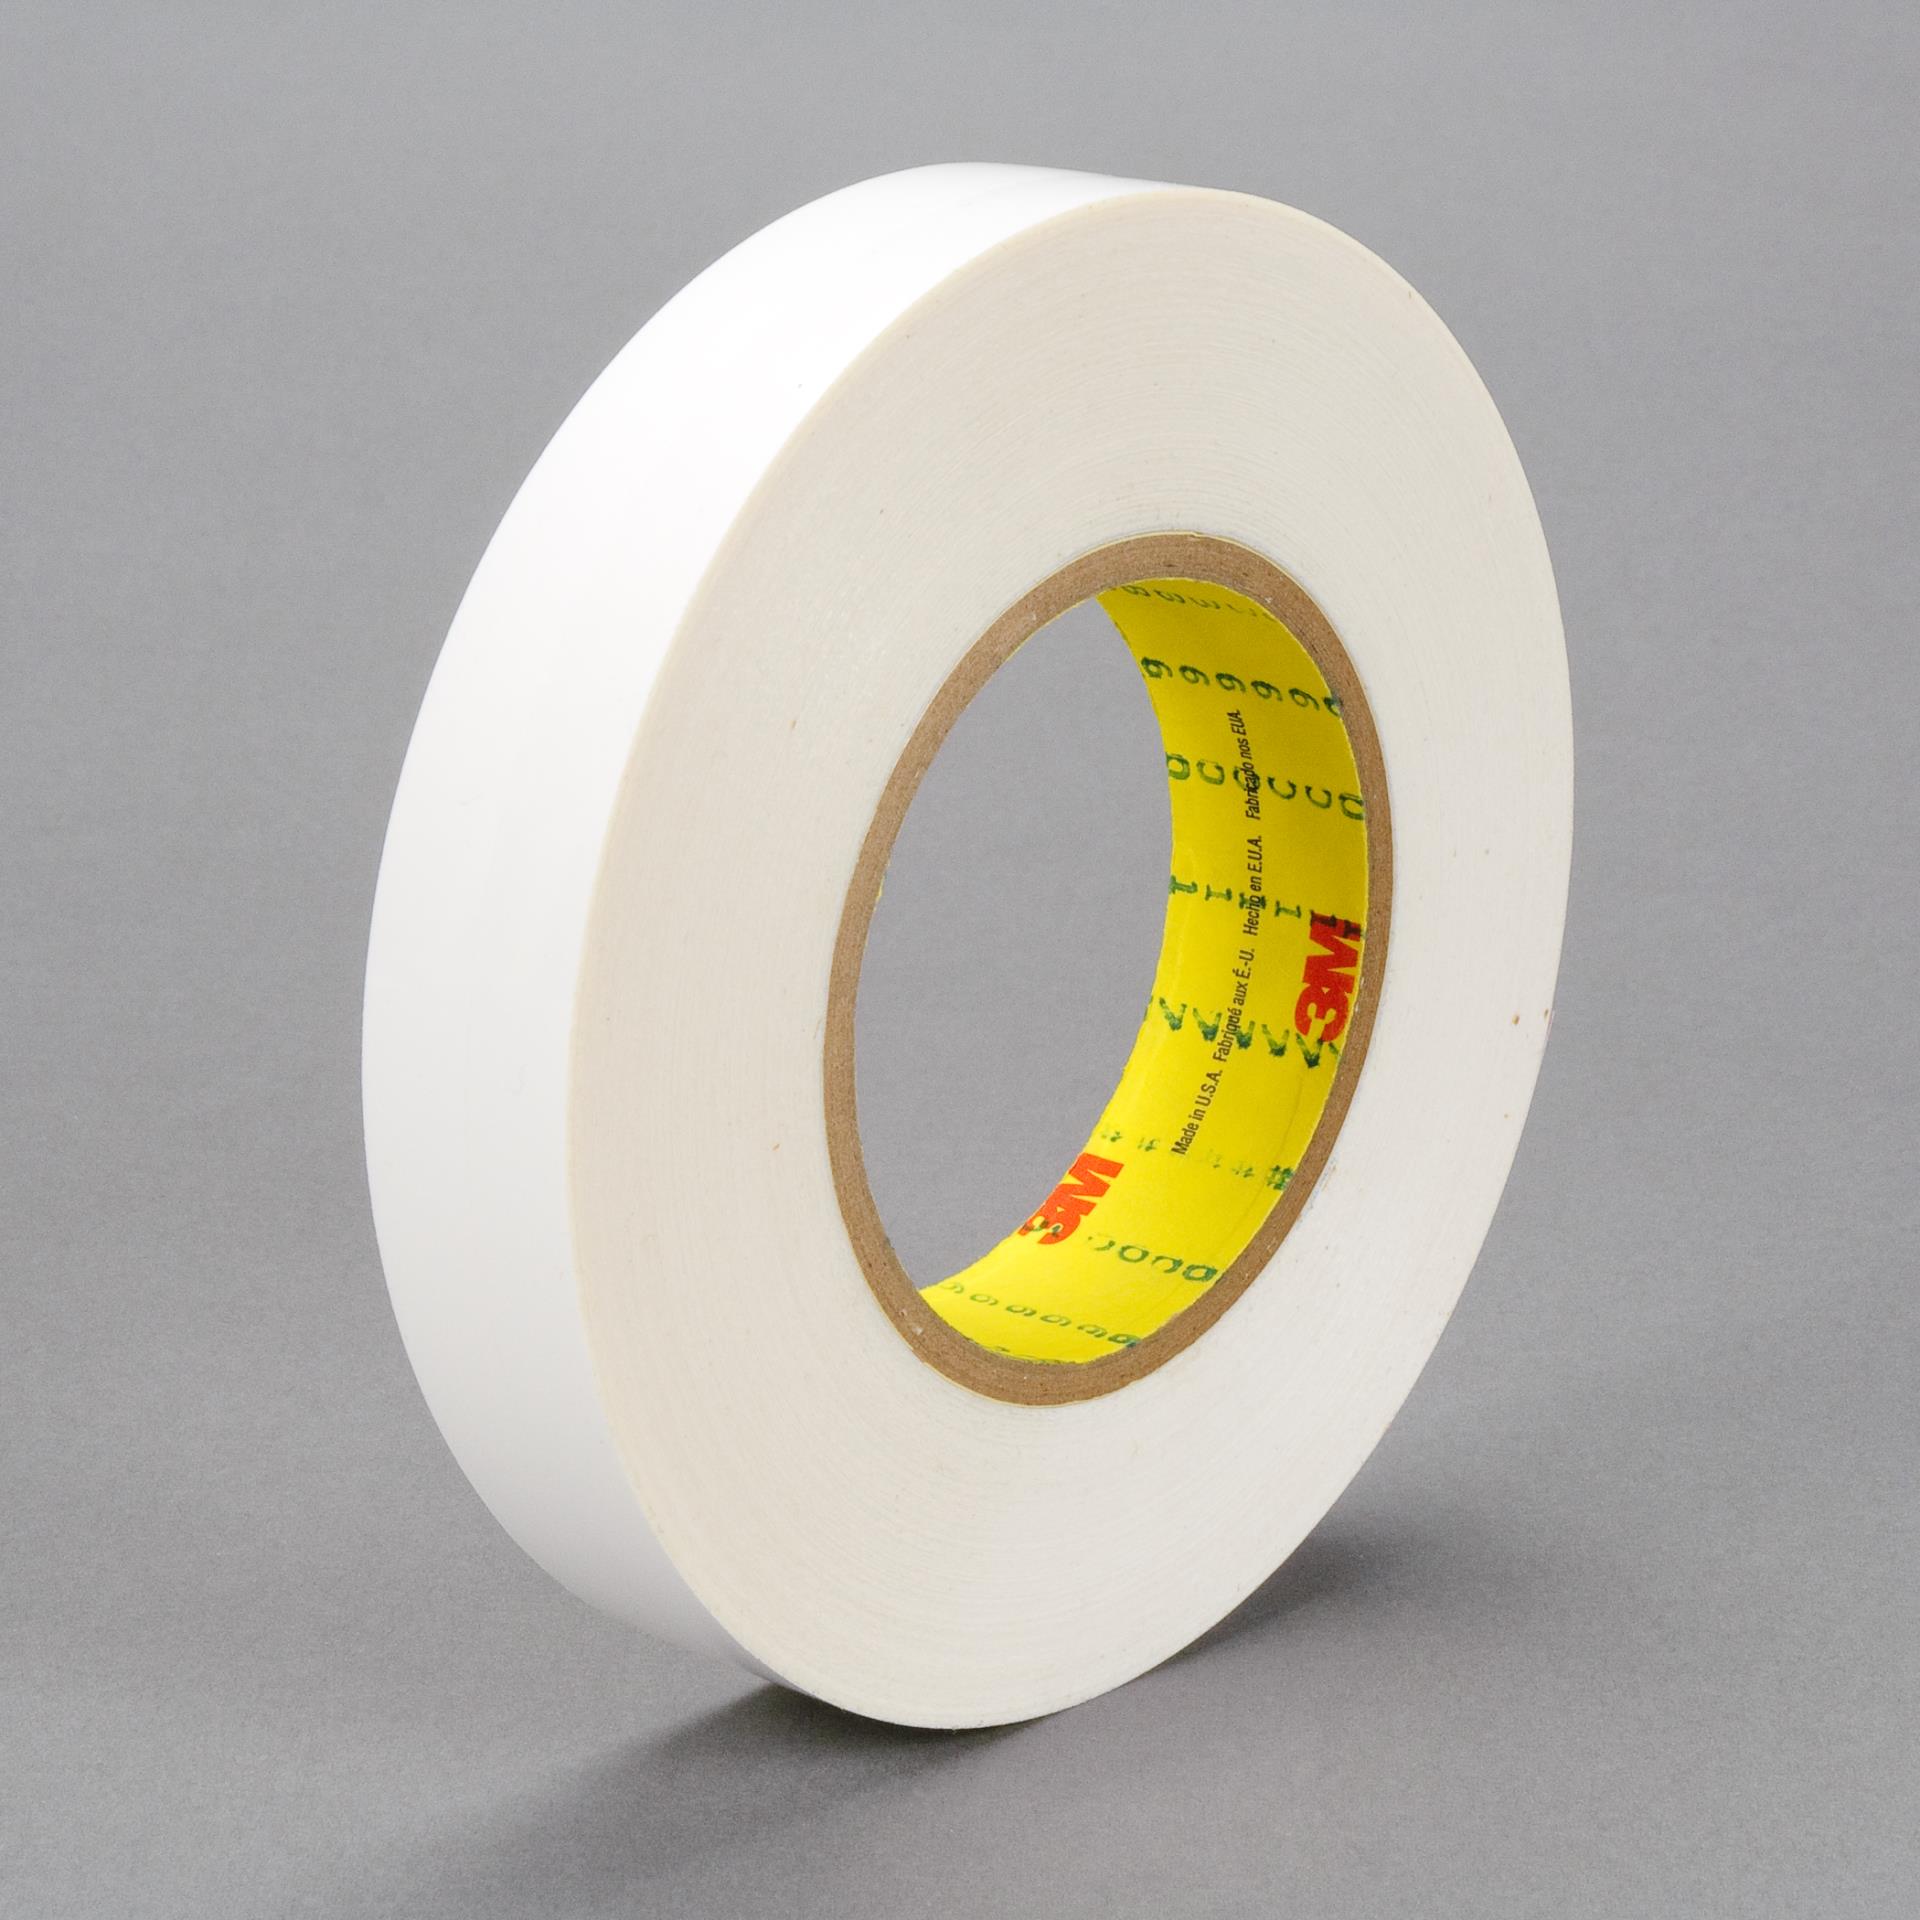 3M Double Coated Tape Extend Liner 476XL Translucent 3/4 in x 60 yd 6.0 mil 1 ea 